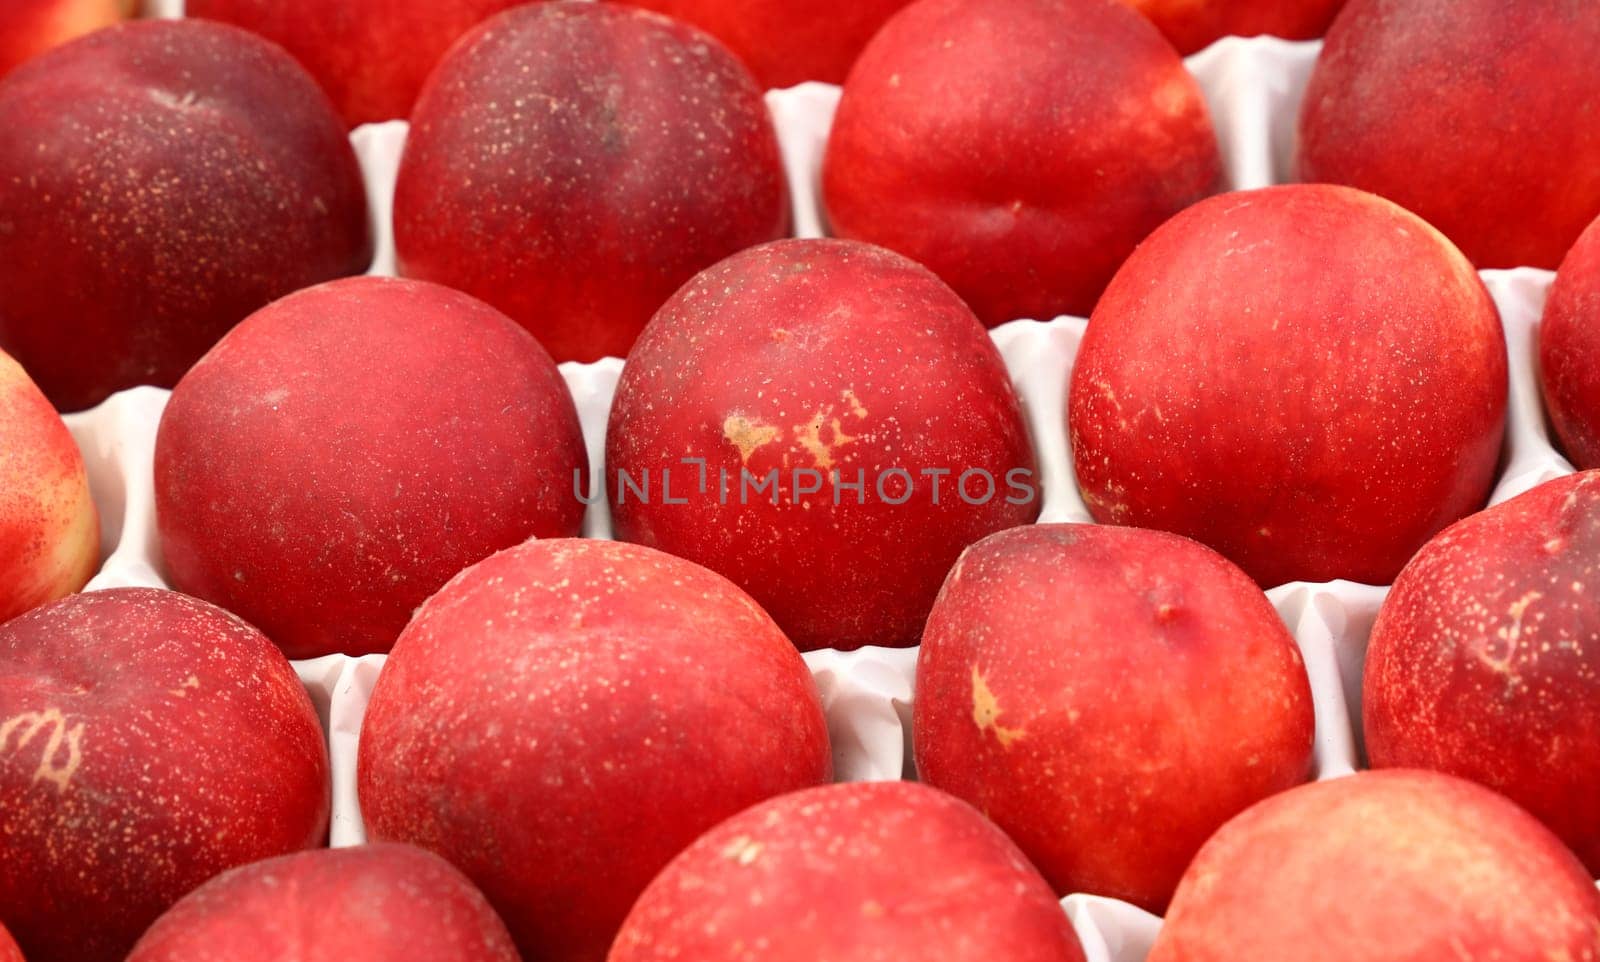 Fresh red nectarine peaches on market stall by BreakingTheWalls